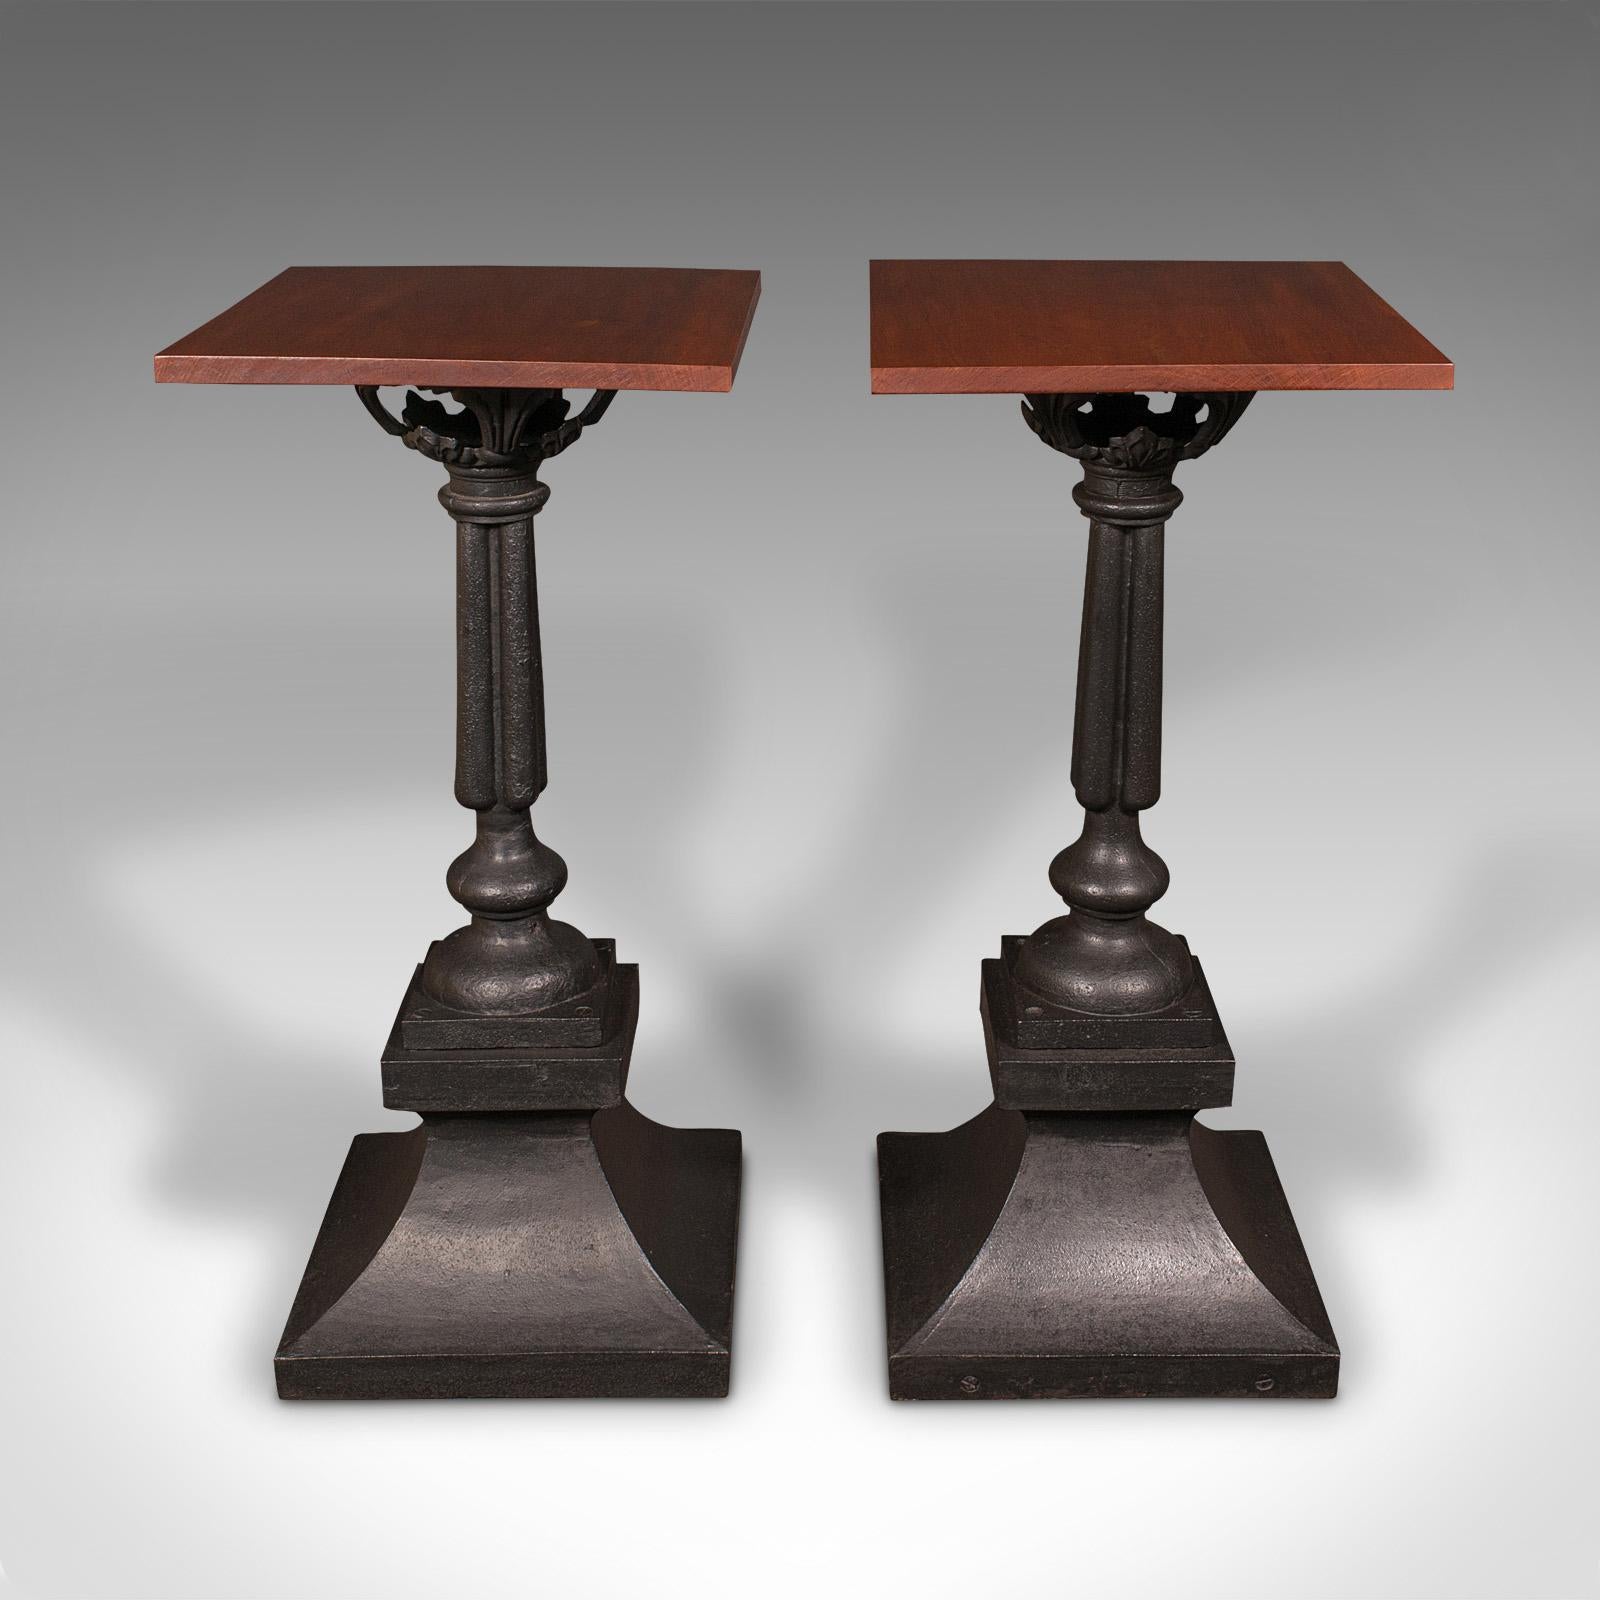 This is a pair of portico tables. An English, walnut and cast iron statuary or planter stand, dating to the Victorian period, circa 1850.

Exquisite and substantial ironmongery from the evocative time of the Great Exhibition
Displaying a desirable